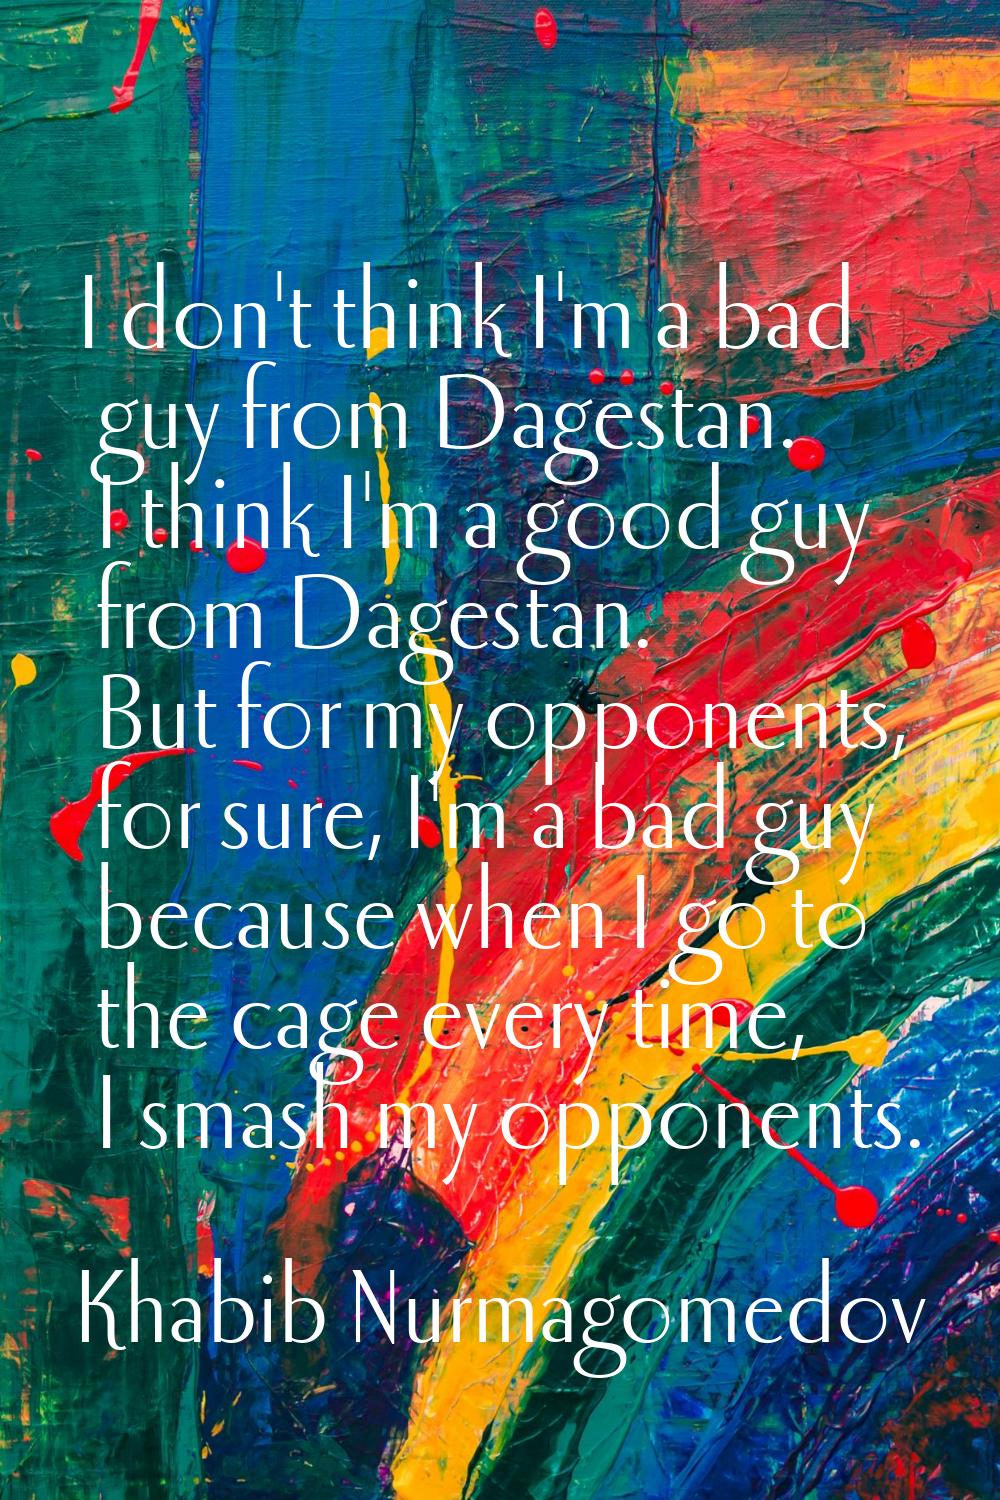 I don't think I'm a bad guy from Dagestan. I think I'm a good guy from Dagestan. But for my opponen